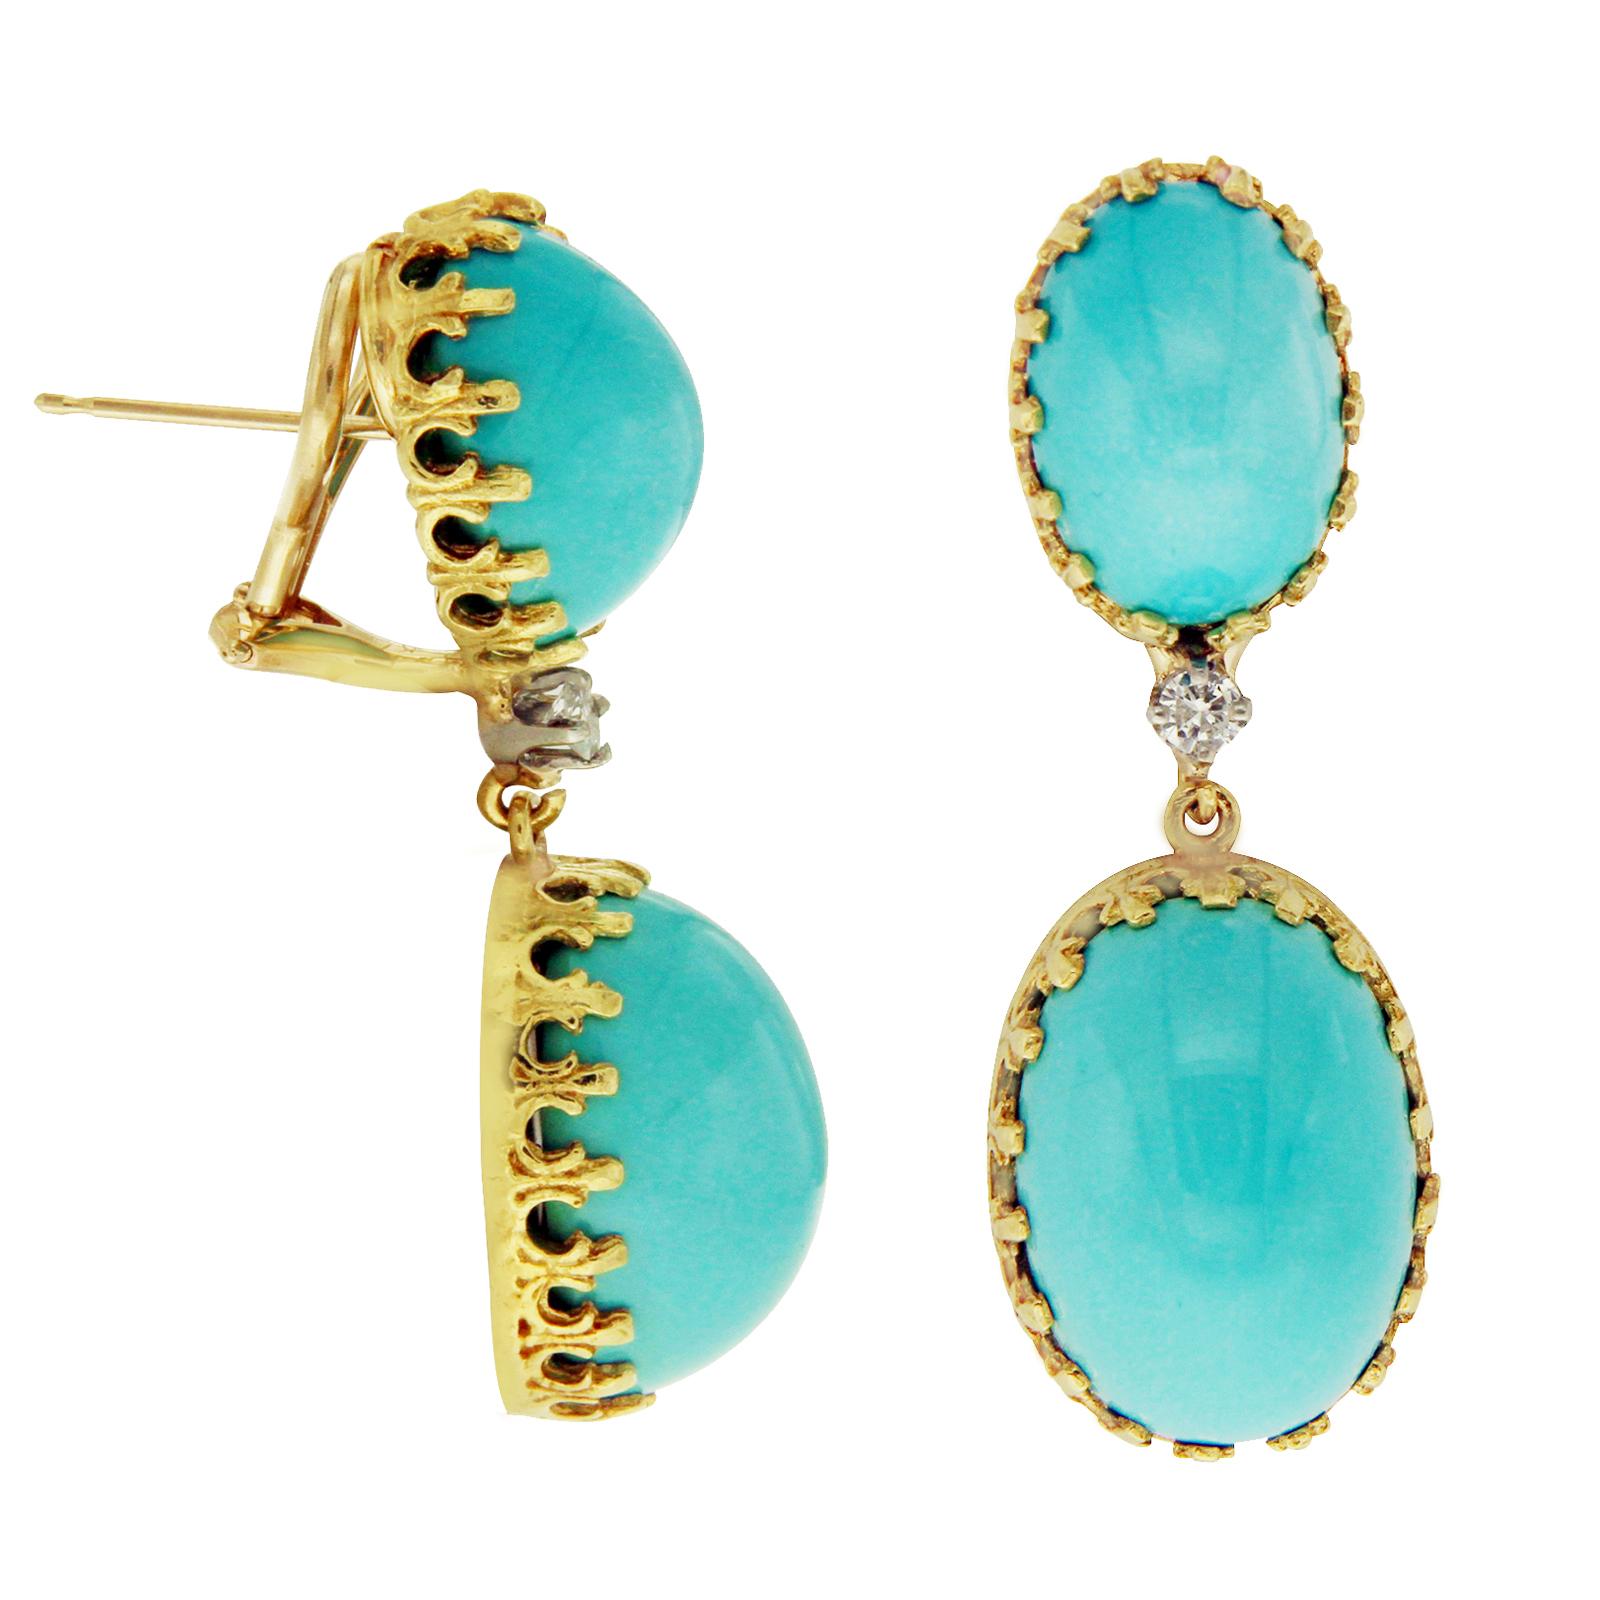 Type: Earrings
Height: 40 mm
Width: 15 mm
Metal: Yellow Gold
Metal Purity: 18K
Hallmarks: Cellino 750
Total Weight: 19.2 Gram
Stone Type: Diamonds & Turquoise 
Condition: Pre-Owned 
Stock Number: U517